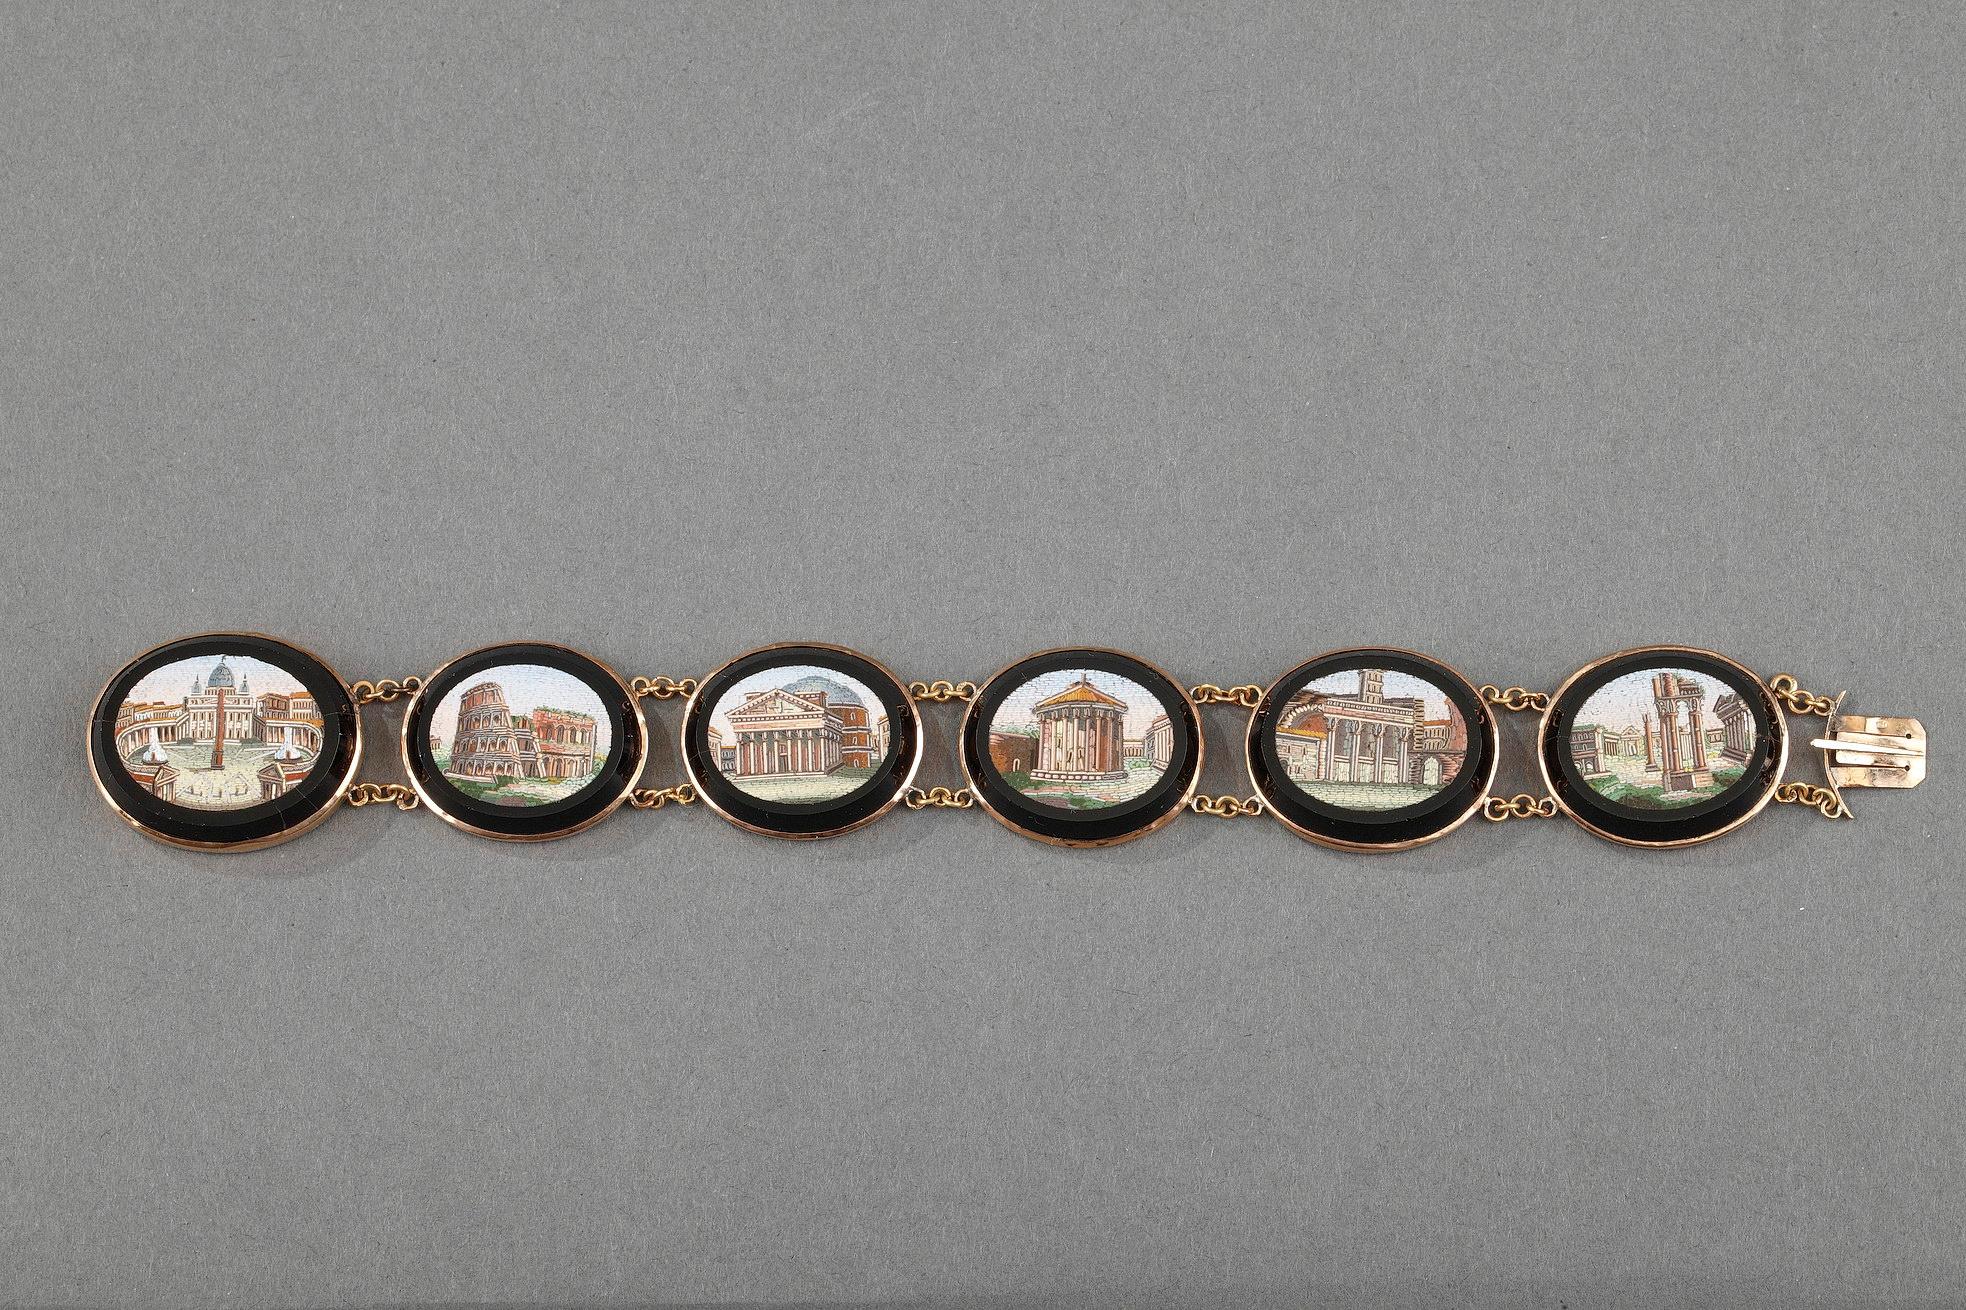 Gold bracelet with six oval, micromosaic medallions set in black glass. Each micromosaic represents a different Roman edifice: Saint Peter’s Basilica, the Coliseum, the Pantheon, the Temple of Vesta, the Temple of Antonius and Faustina, and the